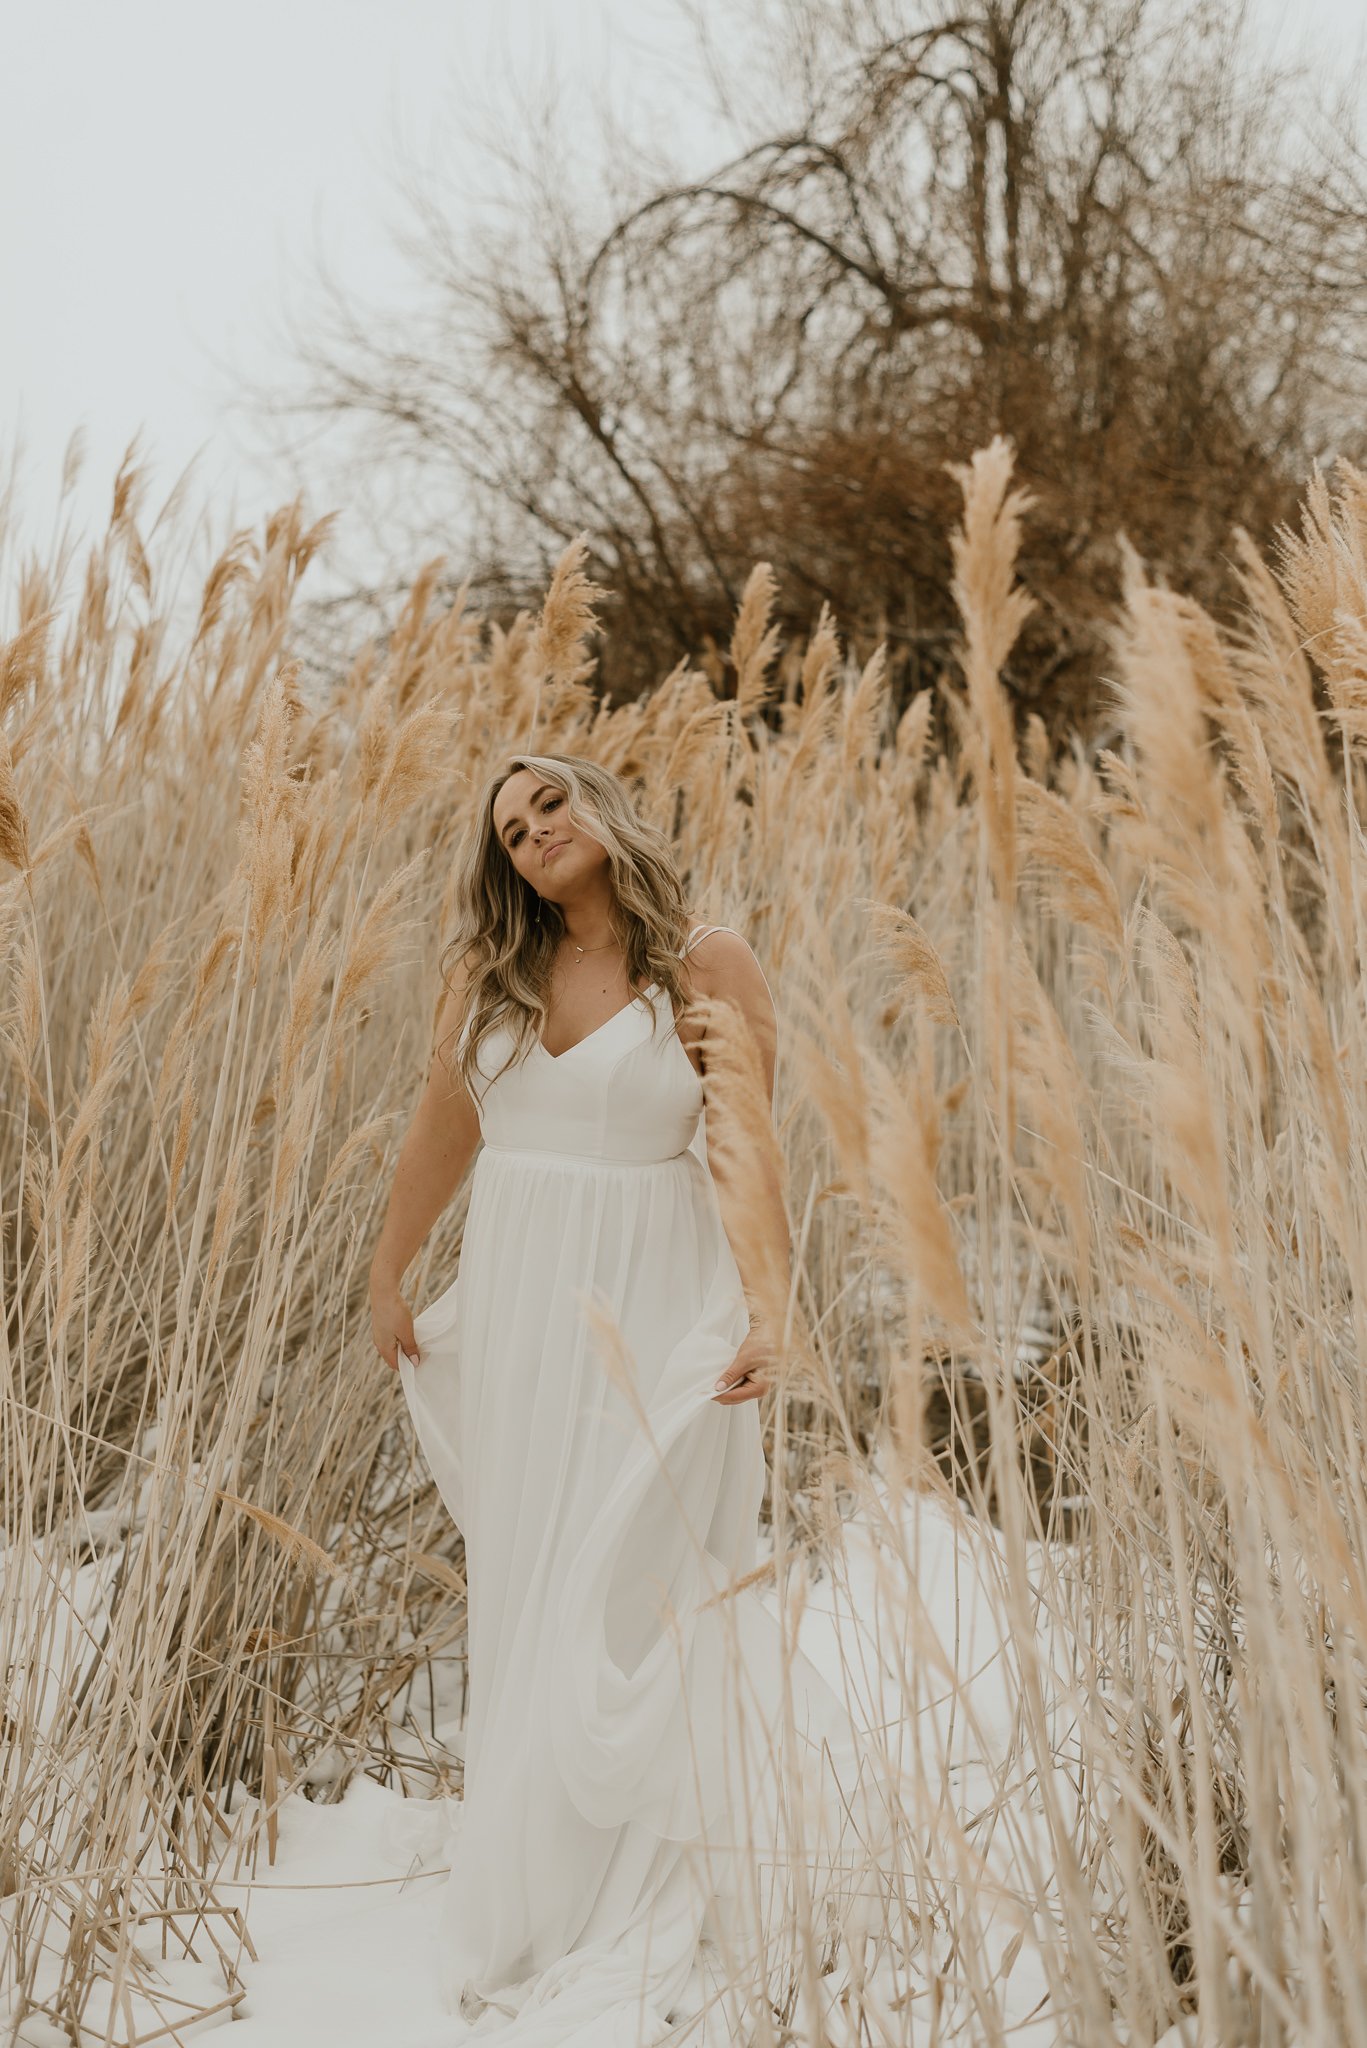  The Beautiful Simplicity of Alli and Landon's Tunnel Springs Park Elopement. There's something undeniably captivating about a simple, intimate wedding. Alli and Landon's elopement at Tunnel Springs Park in Northern Salt Lake City was just that - a c